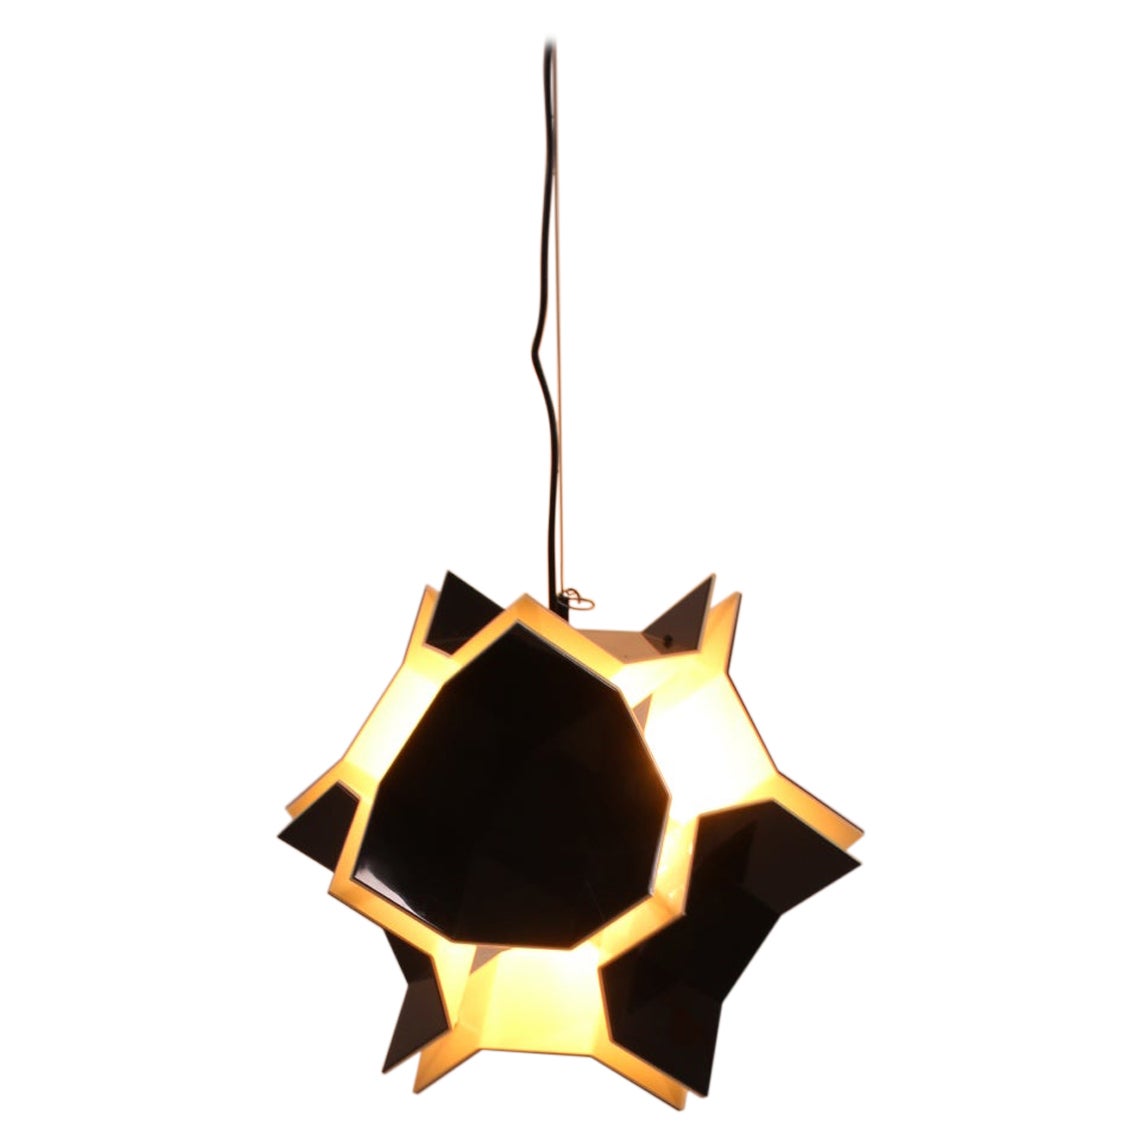 Space Age Acrylic Pendant Lamp by Christophe de Ryck for Dark, 1970s